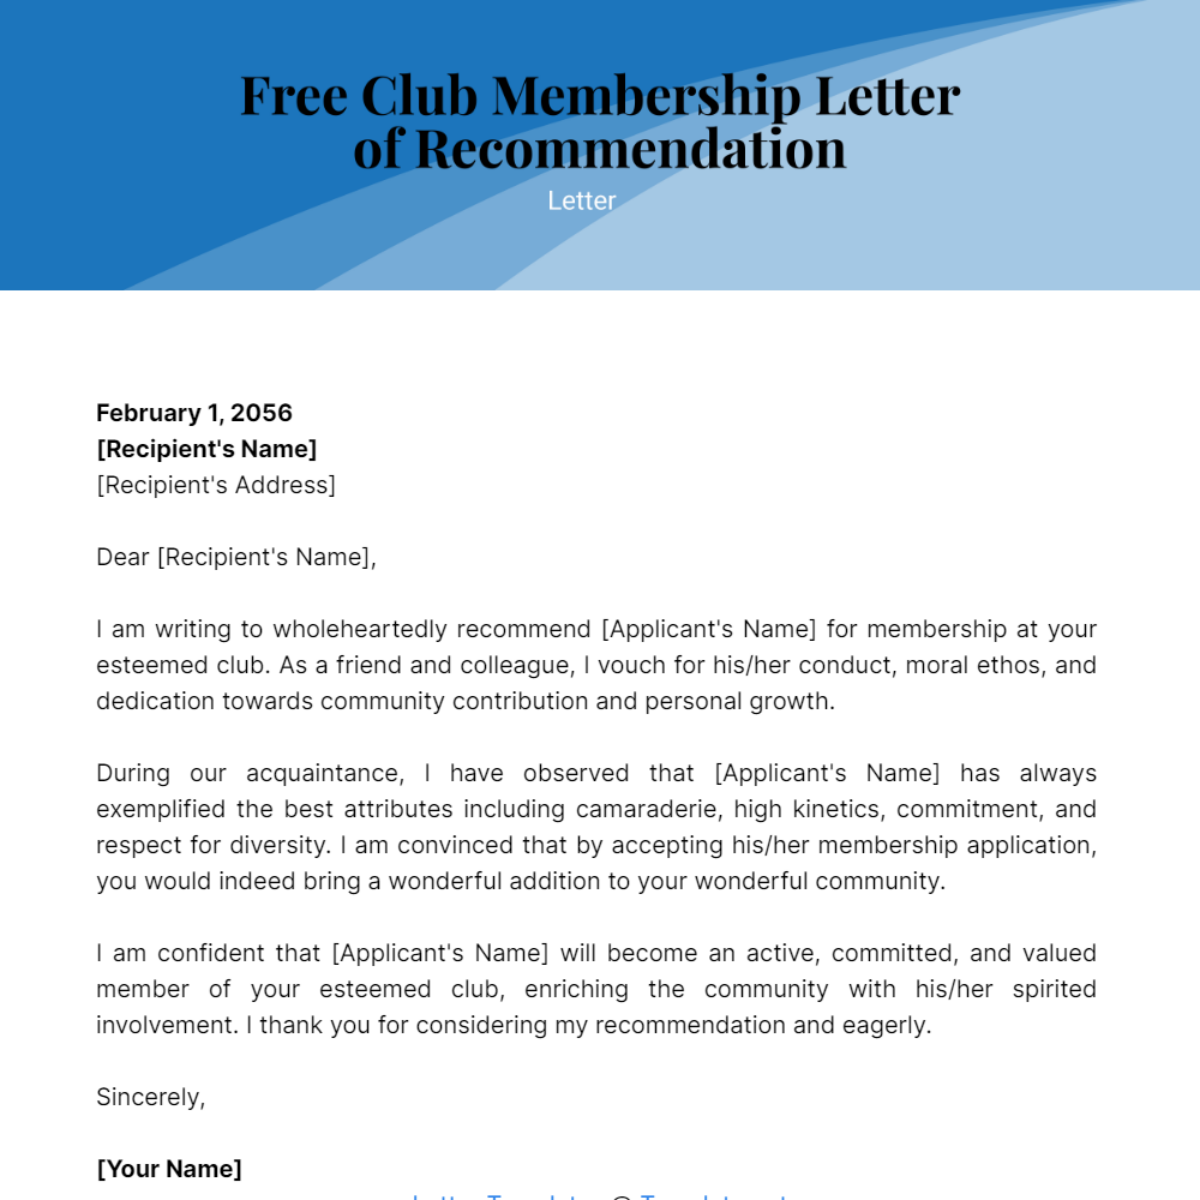 Club Membership Letter of Recommendation Template